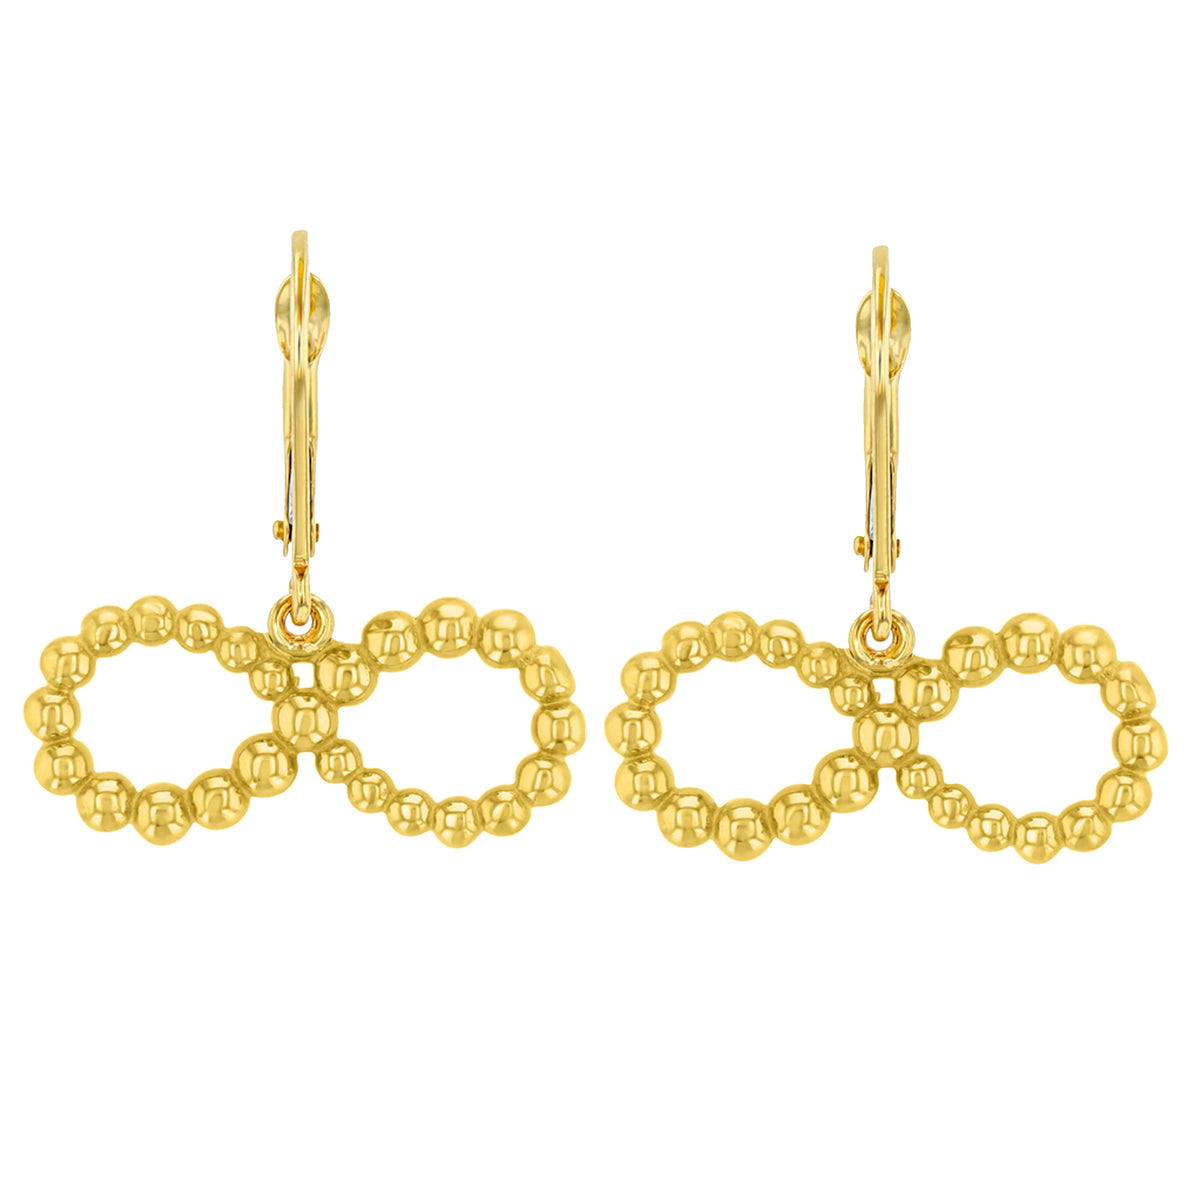 14k Yellow Gold Beaded Infinity Symbol Dangling Earrings with Leverback